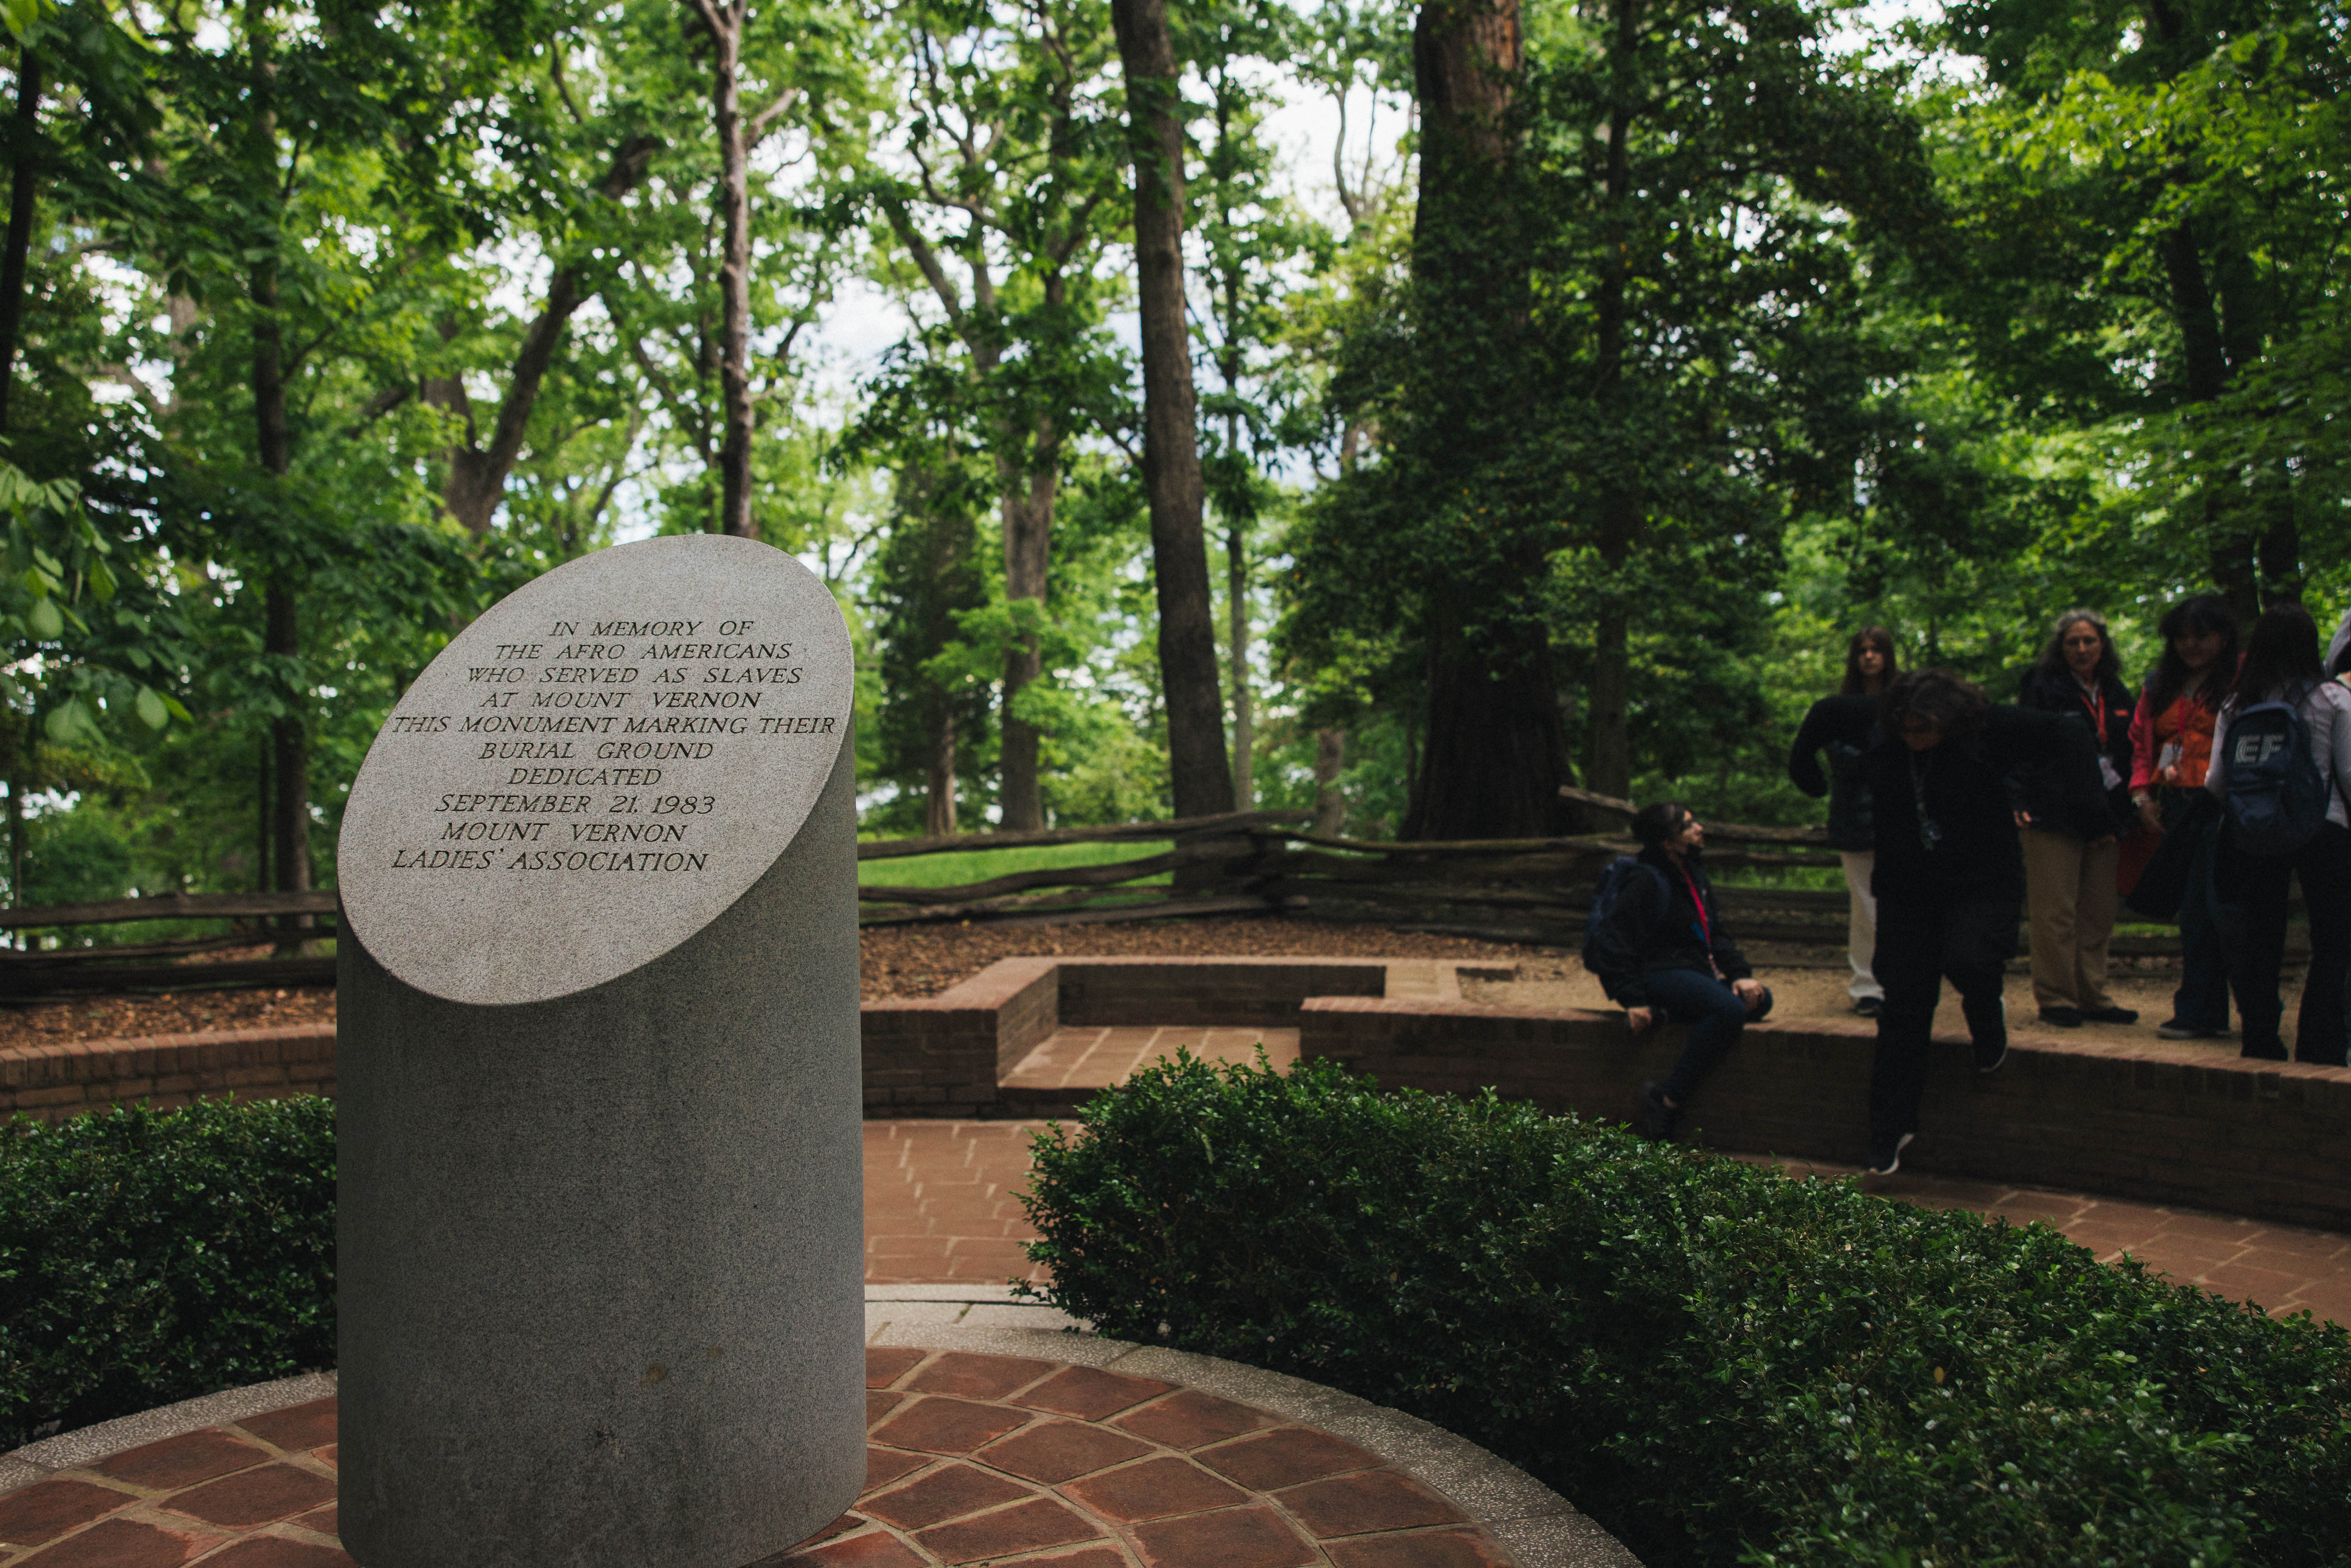 Inside Mount Vernon: A photo of the Slave Memorial, designed by architecture students from nearby Howard University.